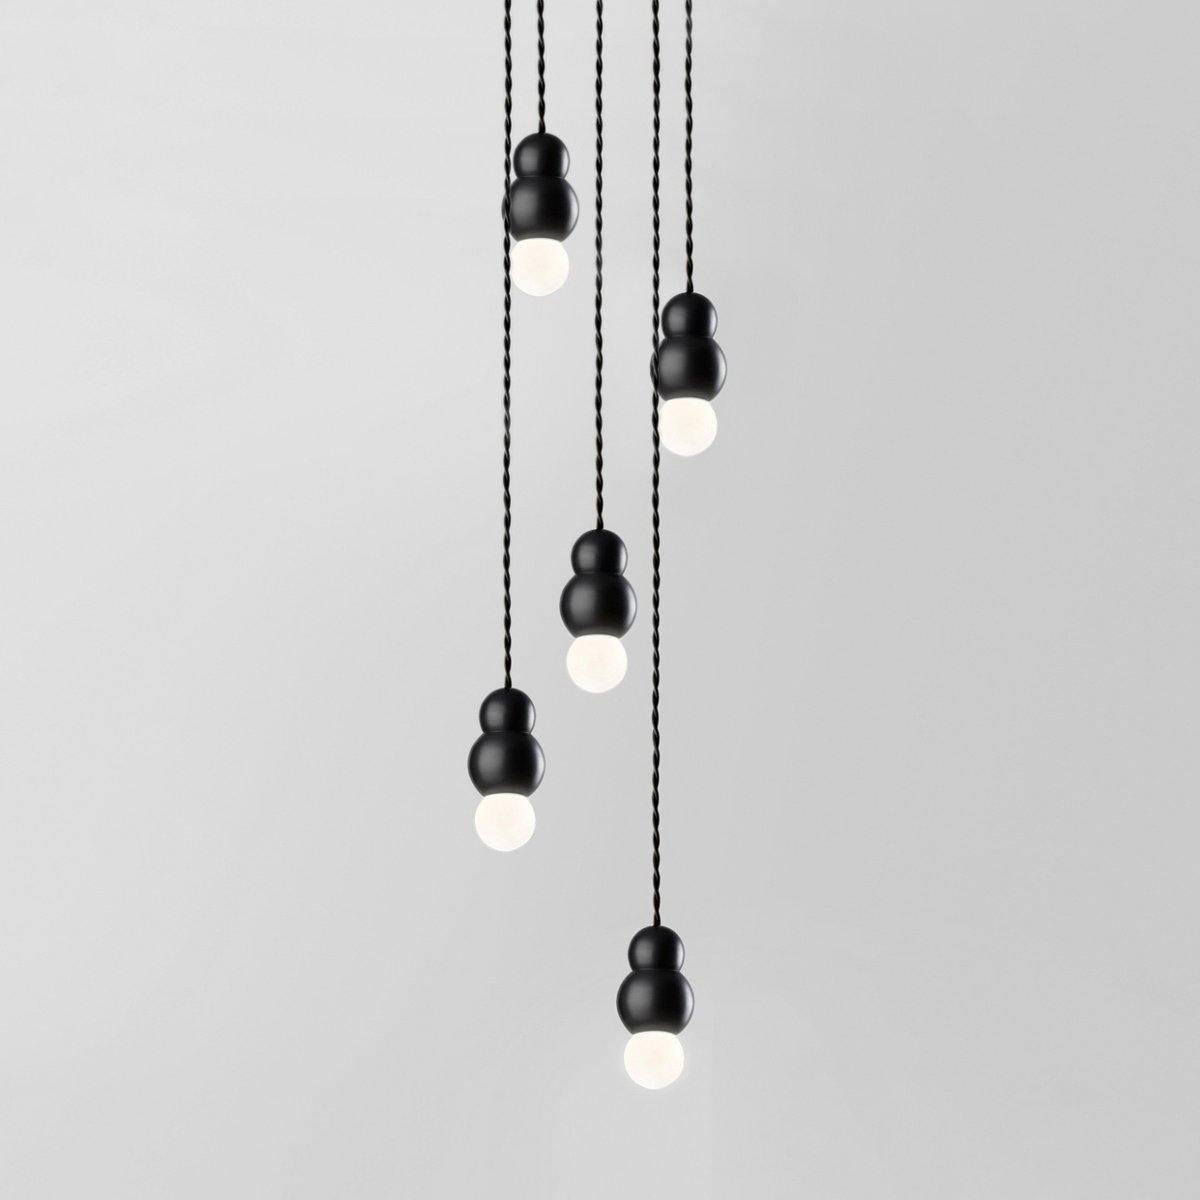 Black Flex Ball Light Pendant Series 5heads with a diameter of 3.14 inches and a height of 5.03 inches (8cm x 12.8cm)